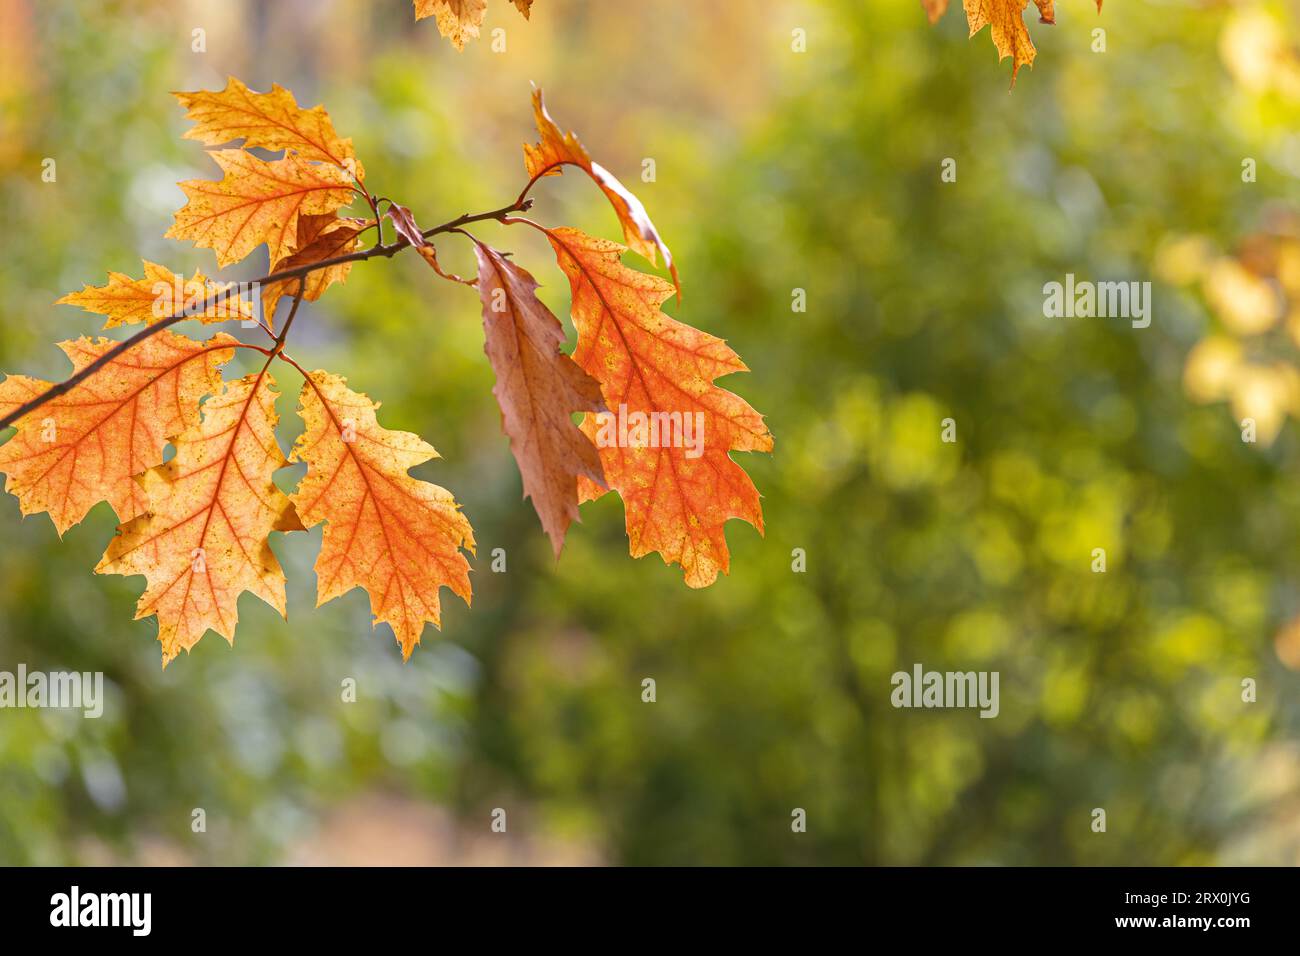 maple tree branch with autumn orange leaves on blurred forest background. Stock Photo